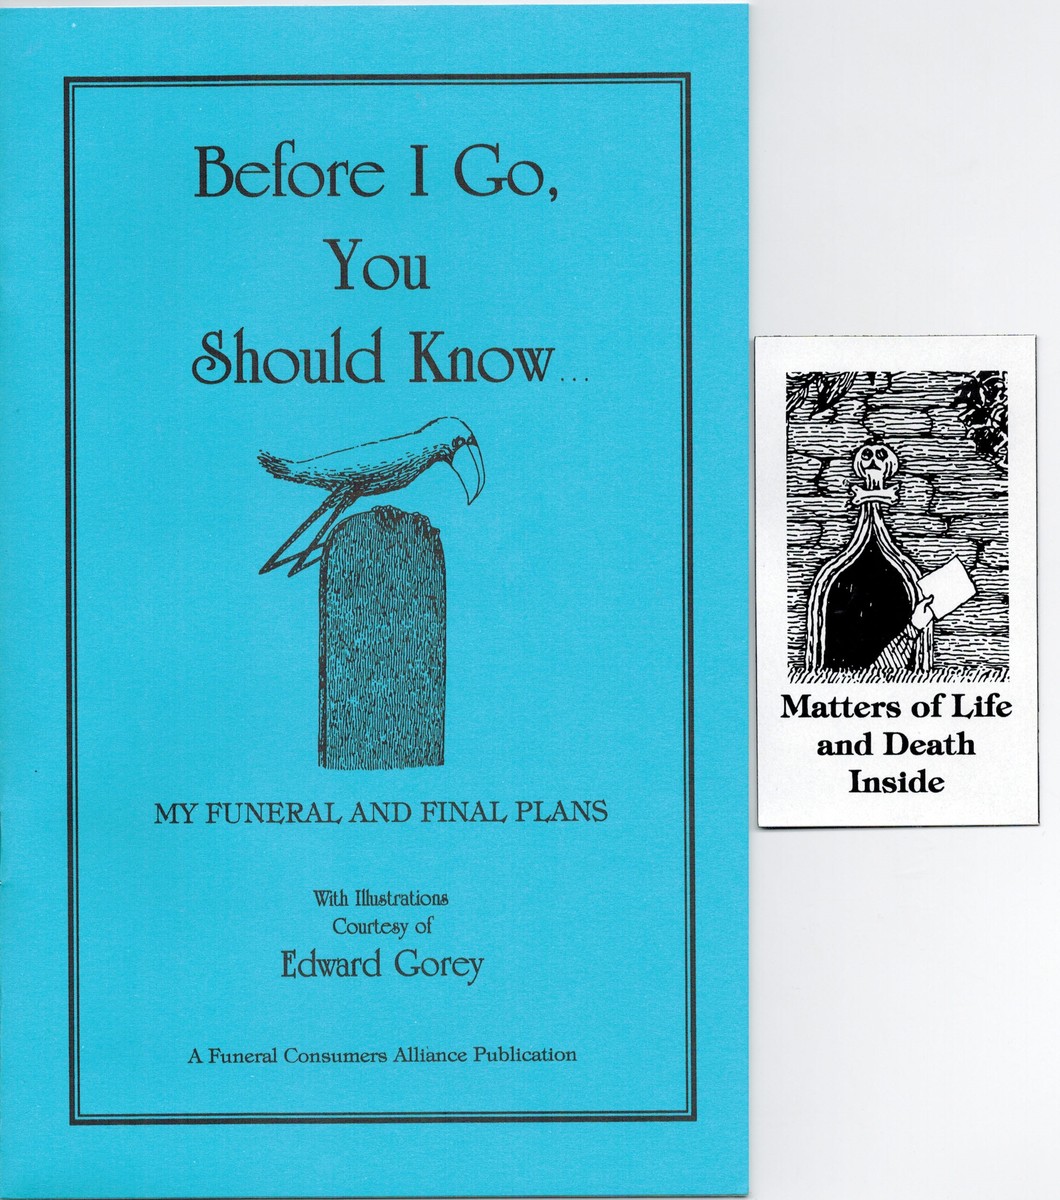 Funeral Consumers Alliance Cover